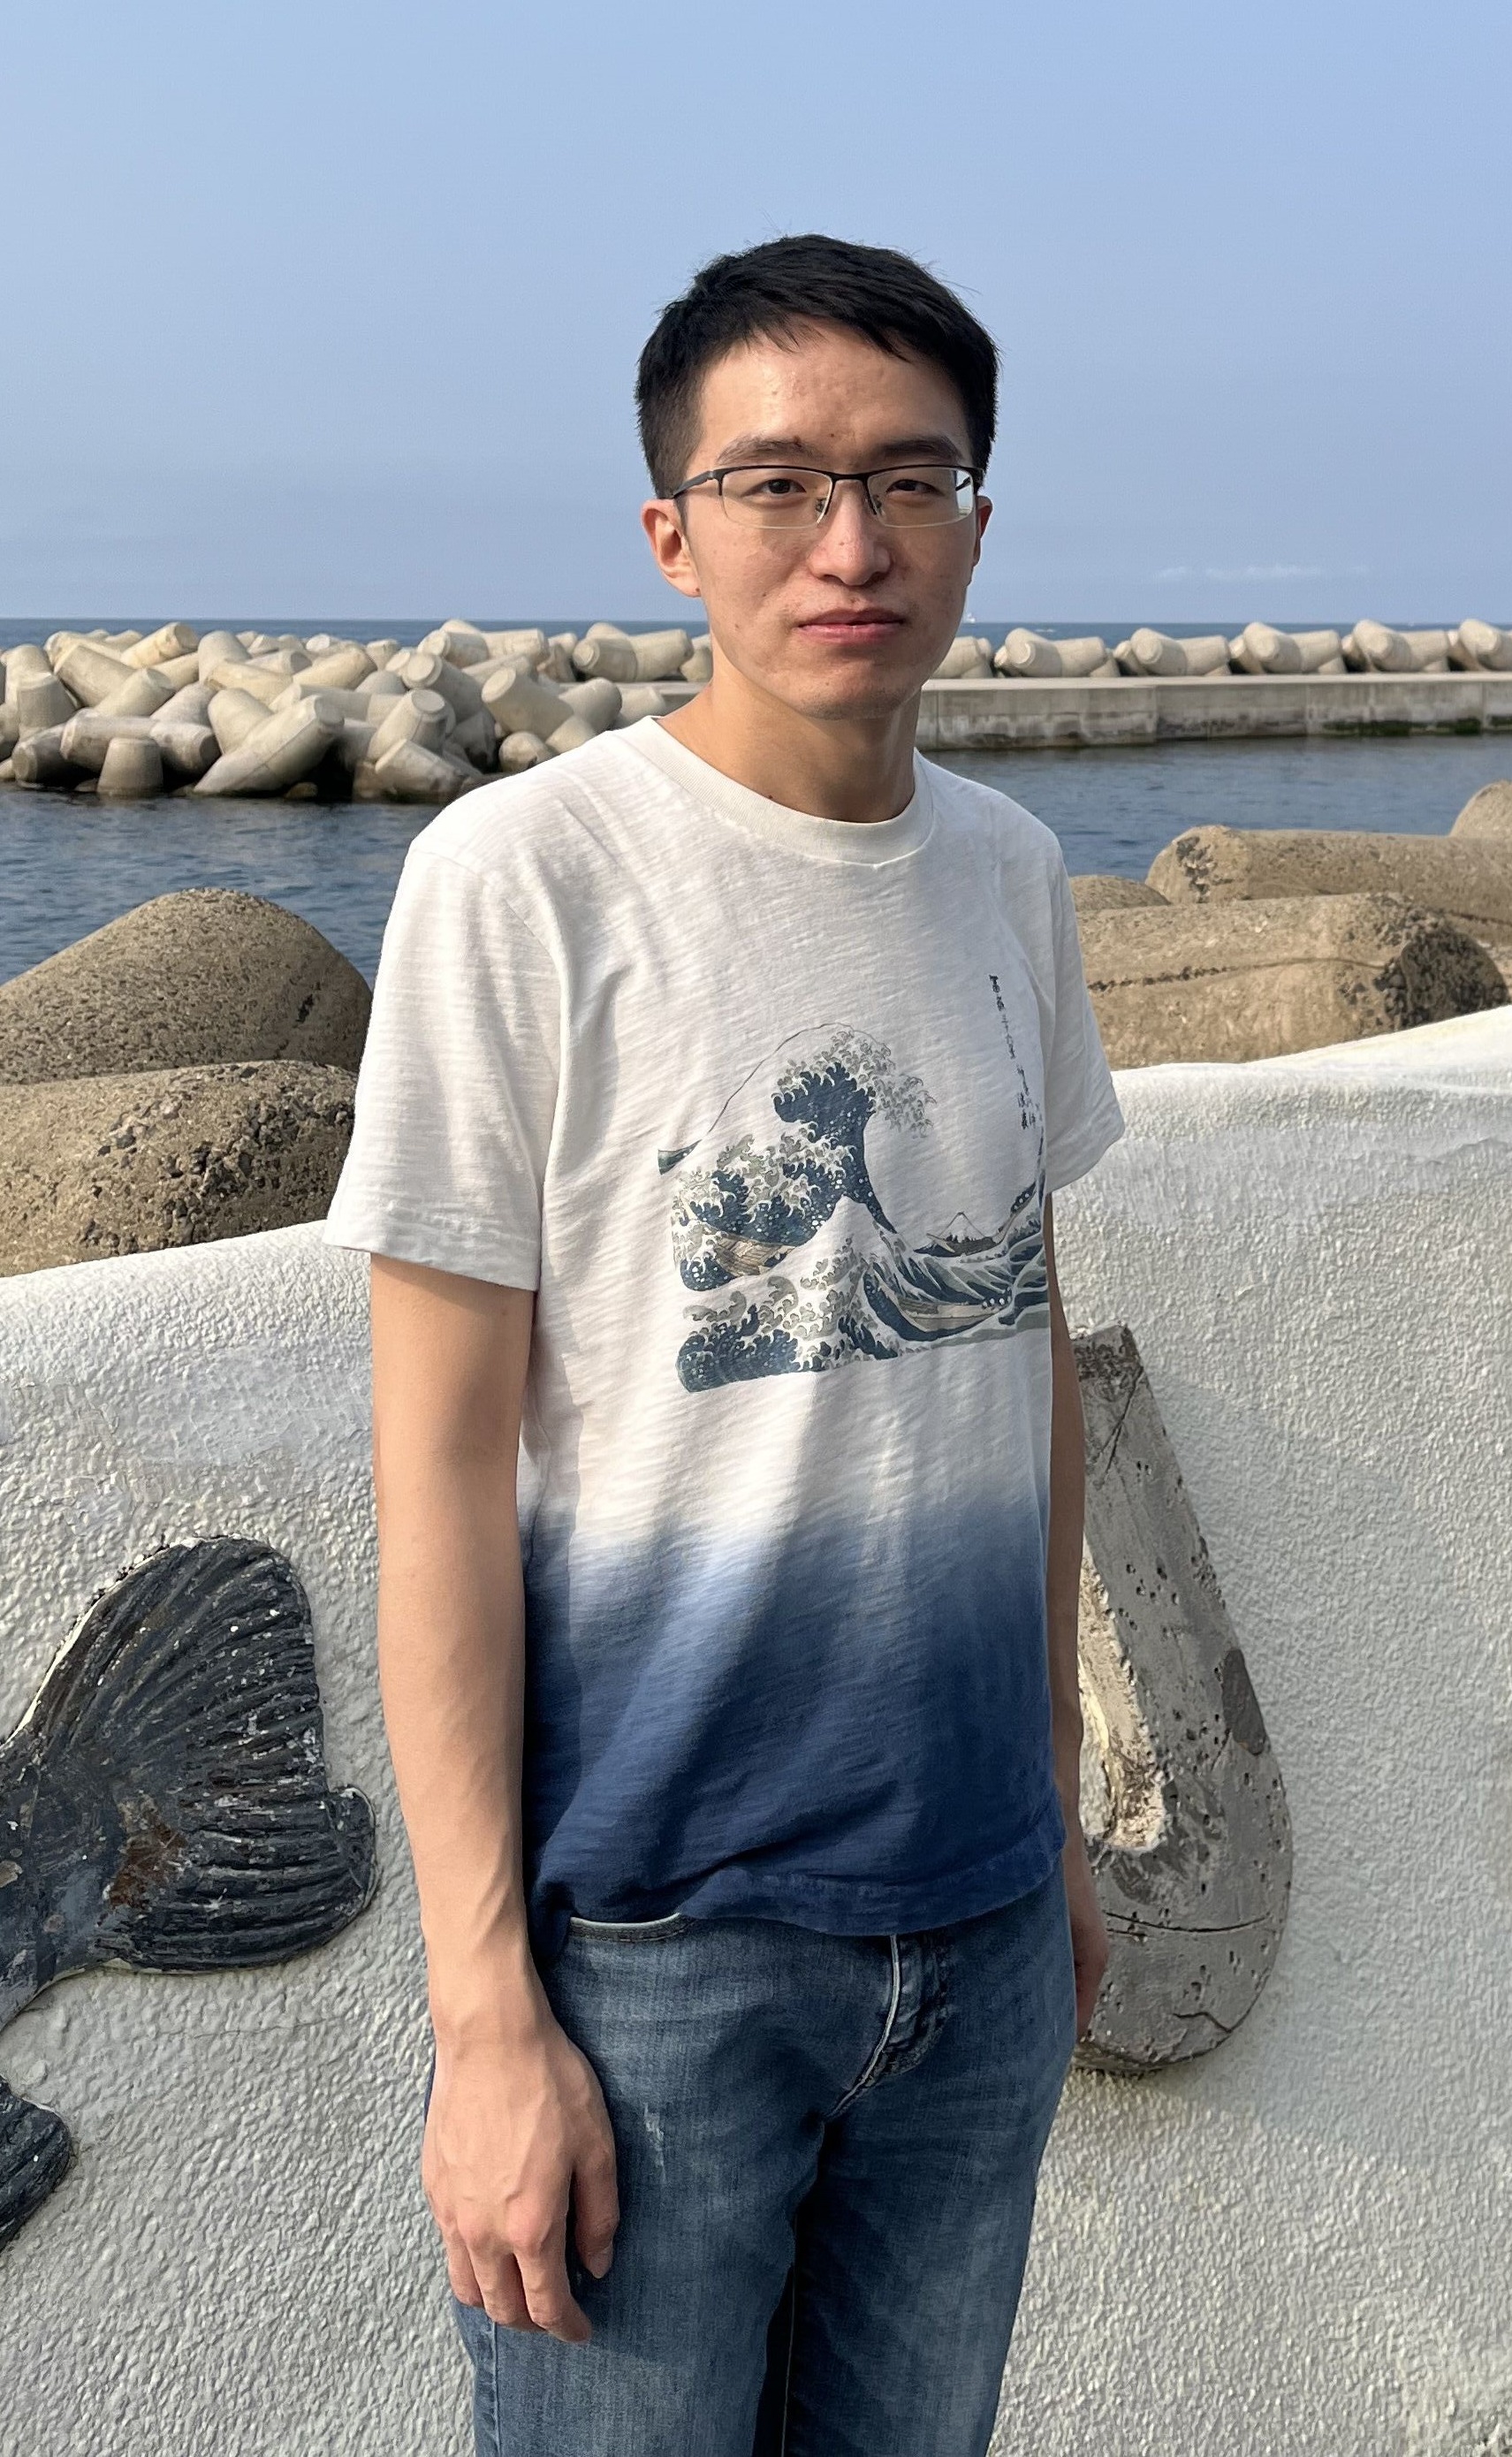 A photograph 2024 Beckman Postdoctoral Fellow Xiao Huan standing in front of a jetty in the water.